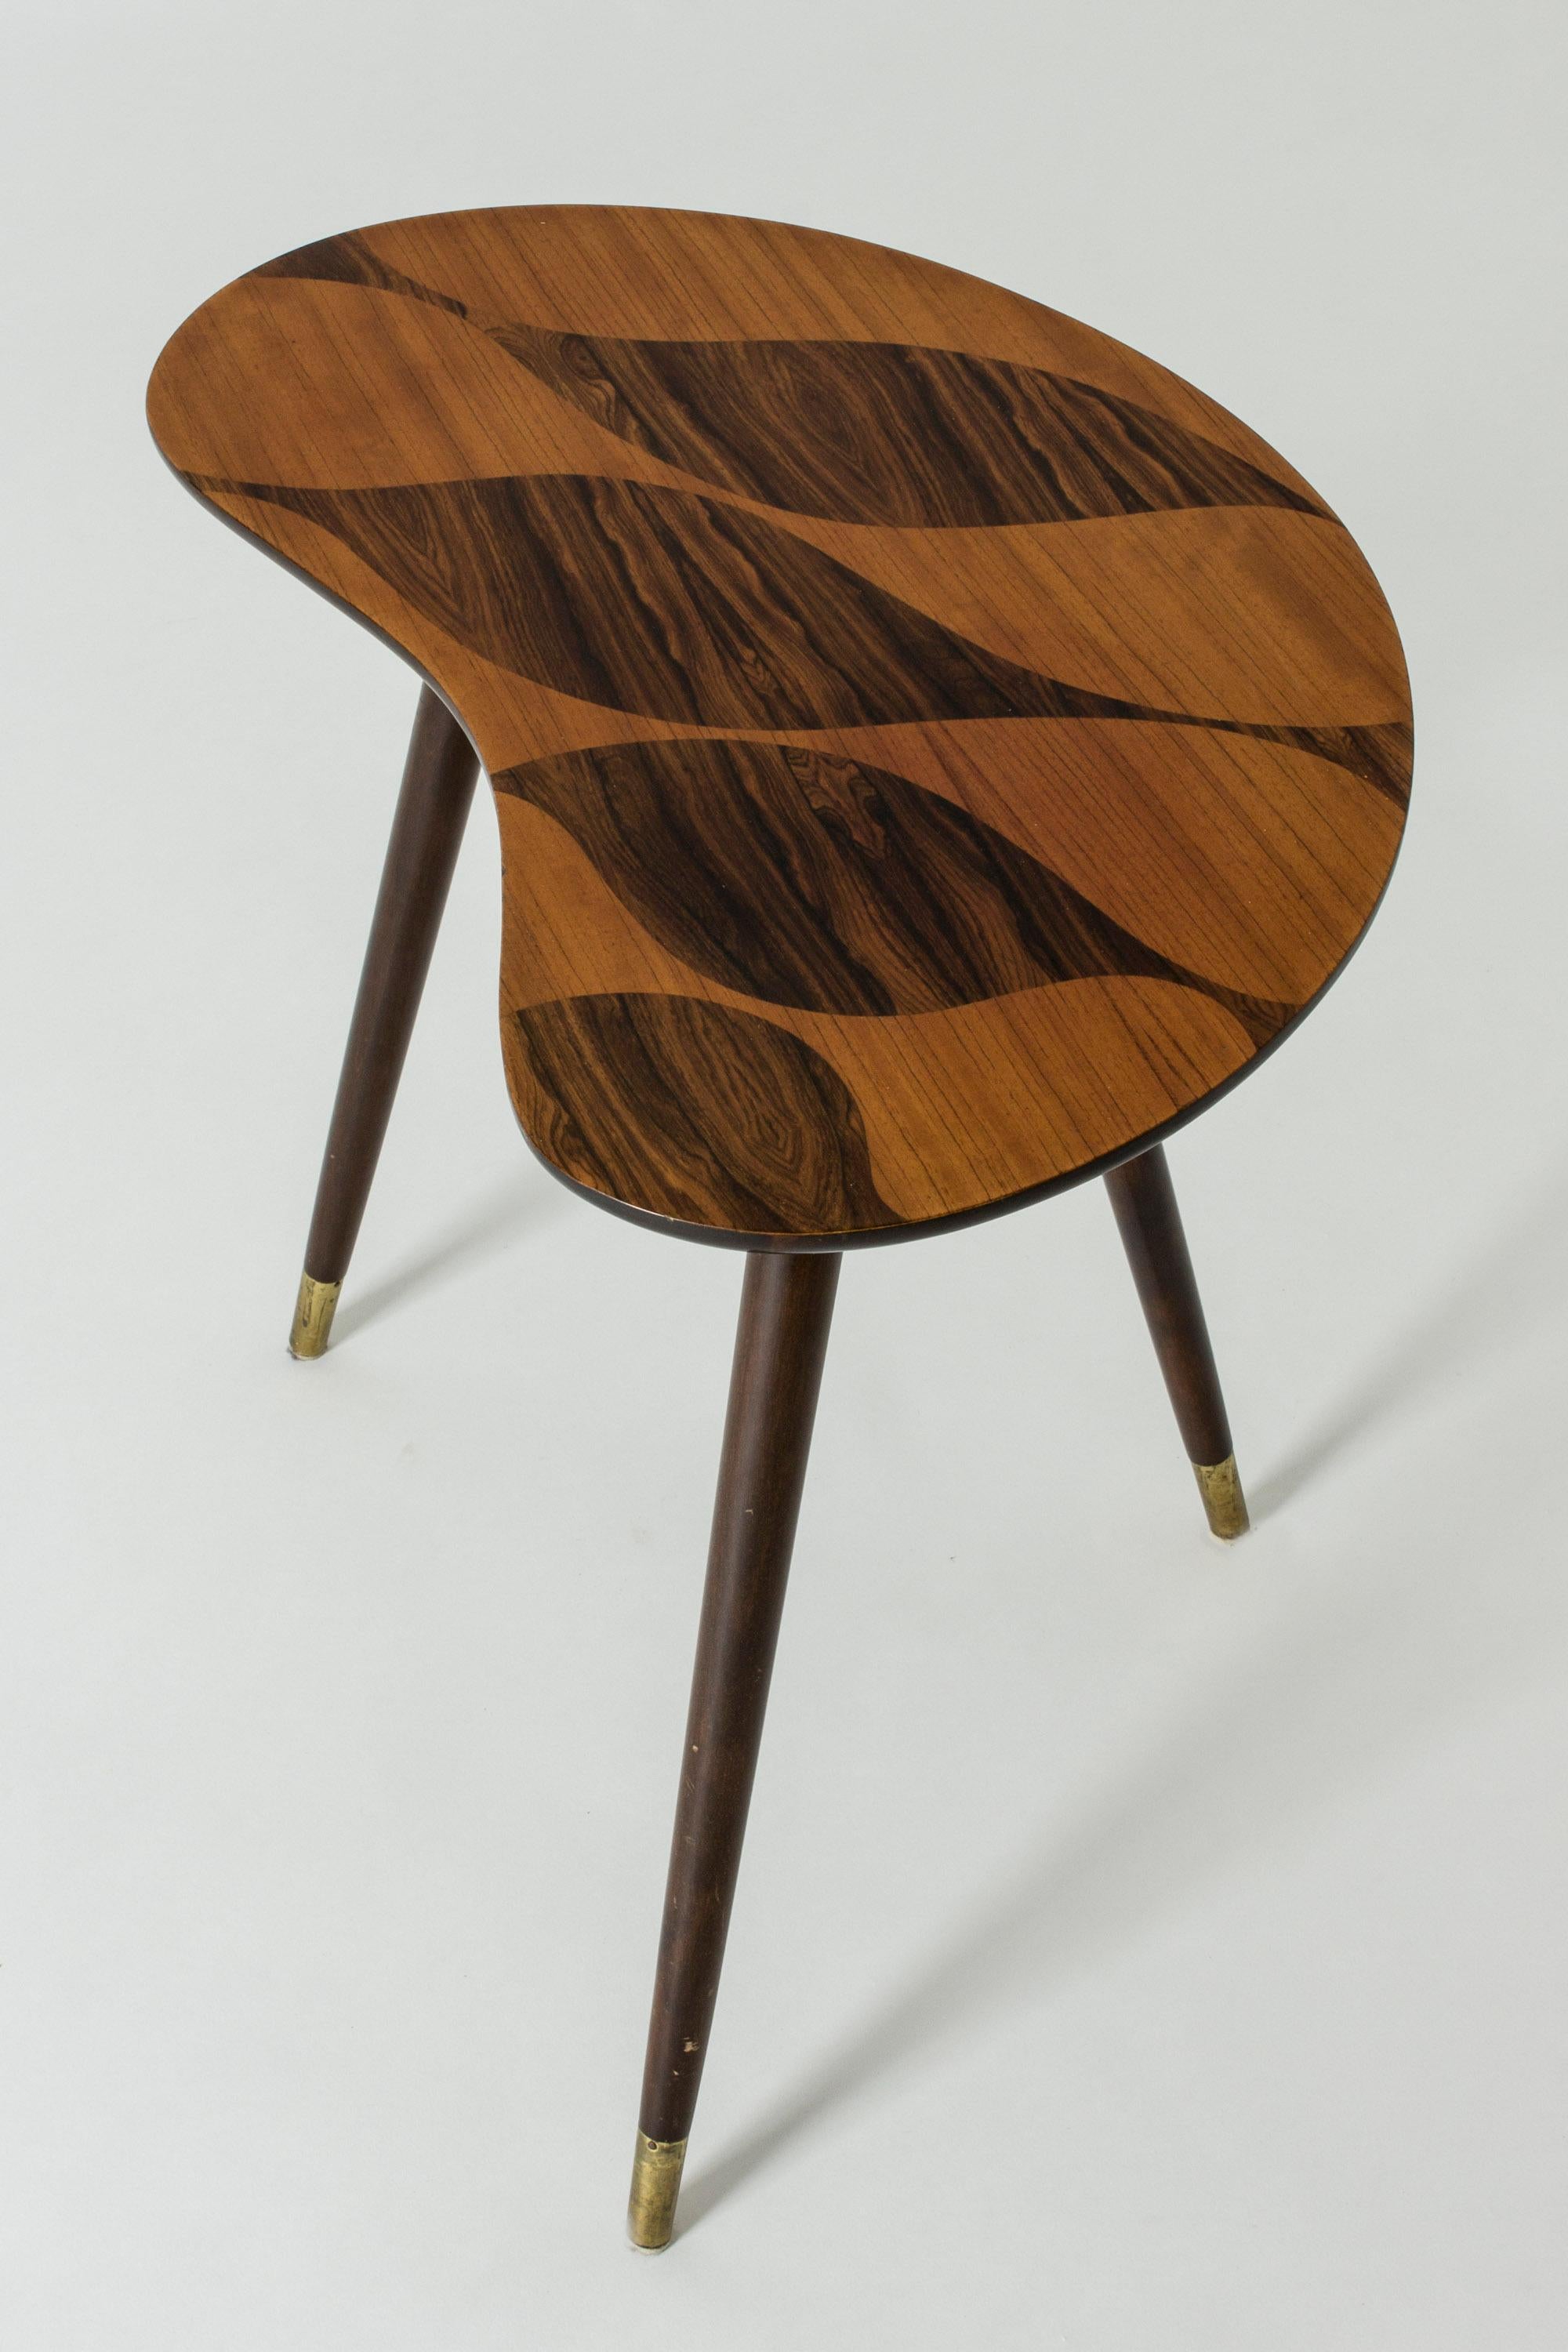 Mid-20th Century Organic Swedish Midcentury Coffee/Occasional Table with Inlaid Wood